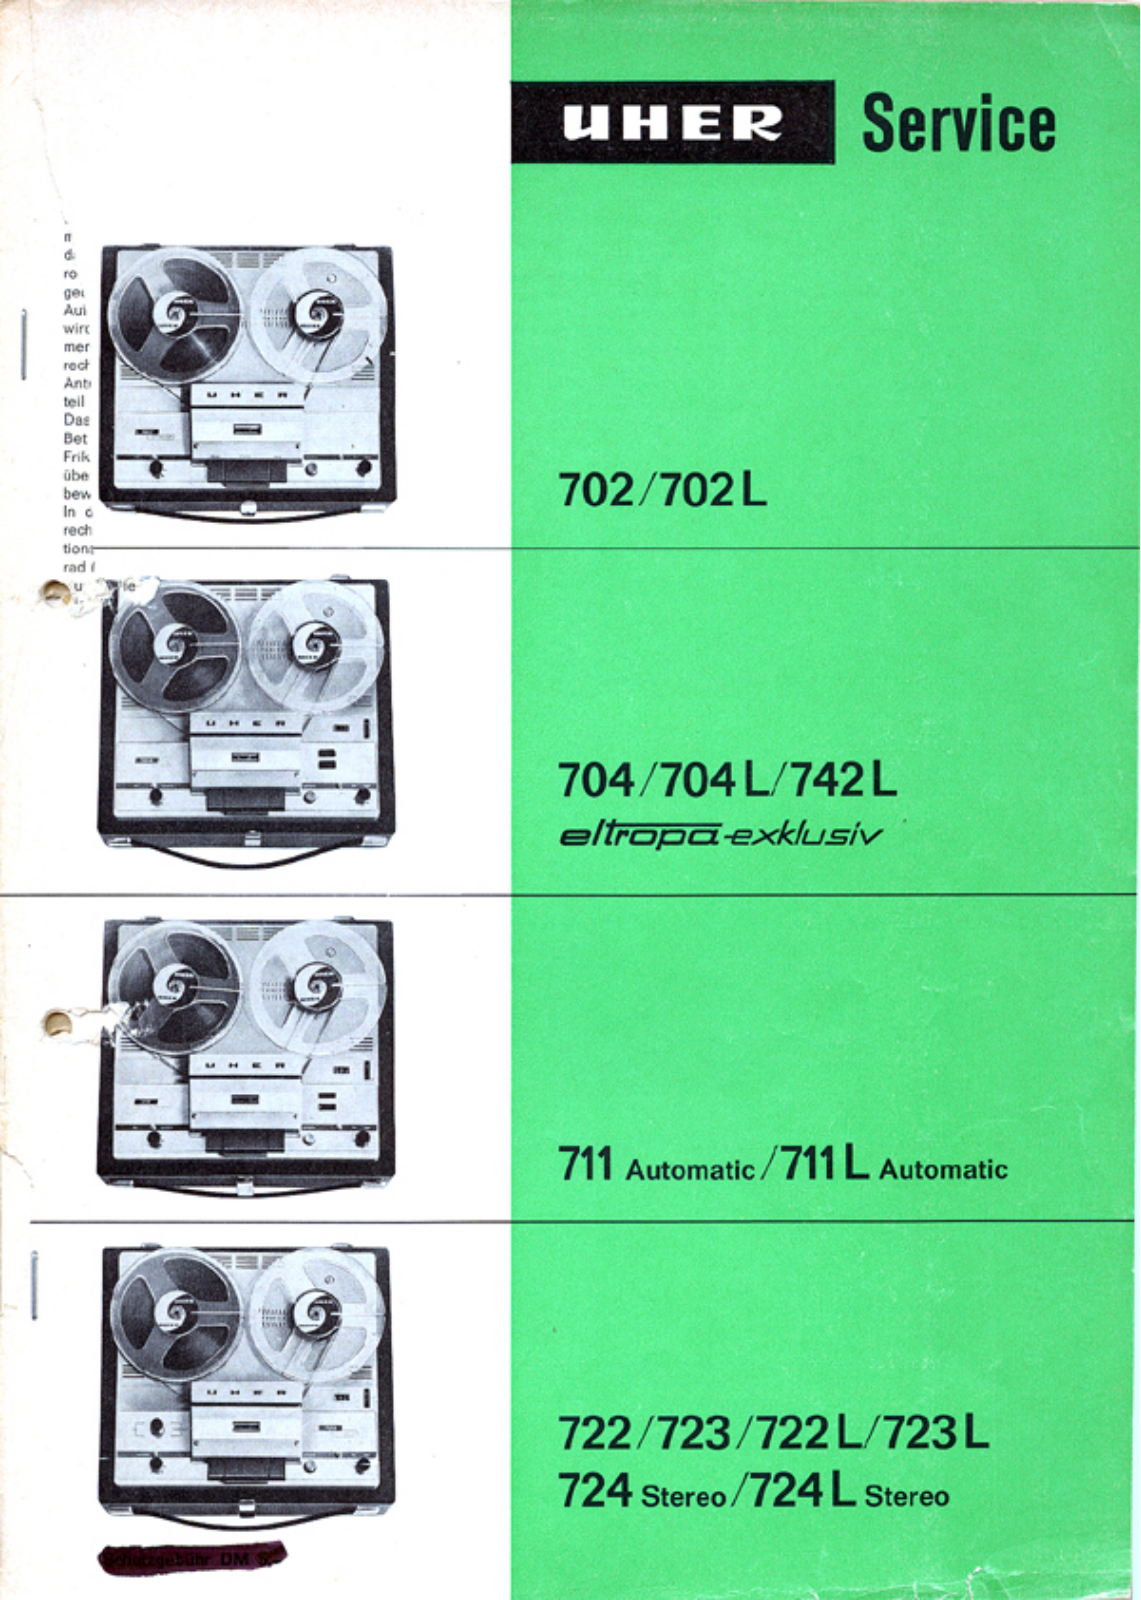 Uher 724 Stereo Service manual